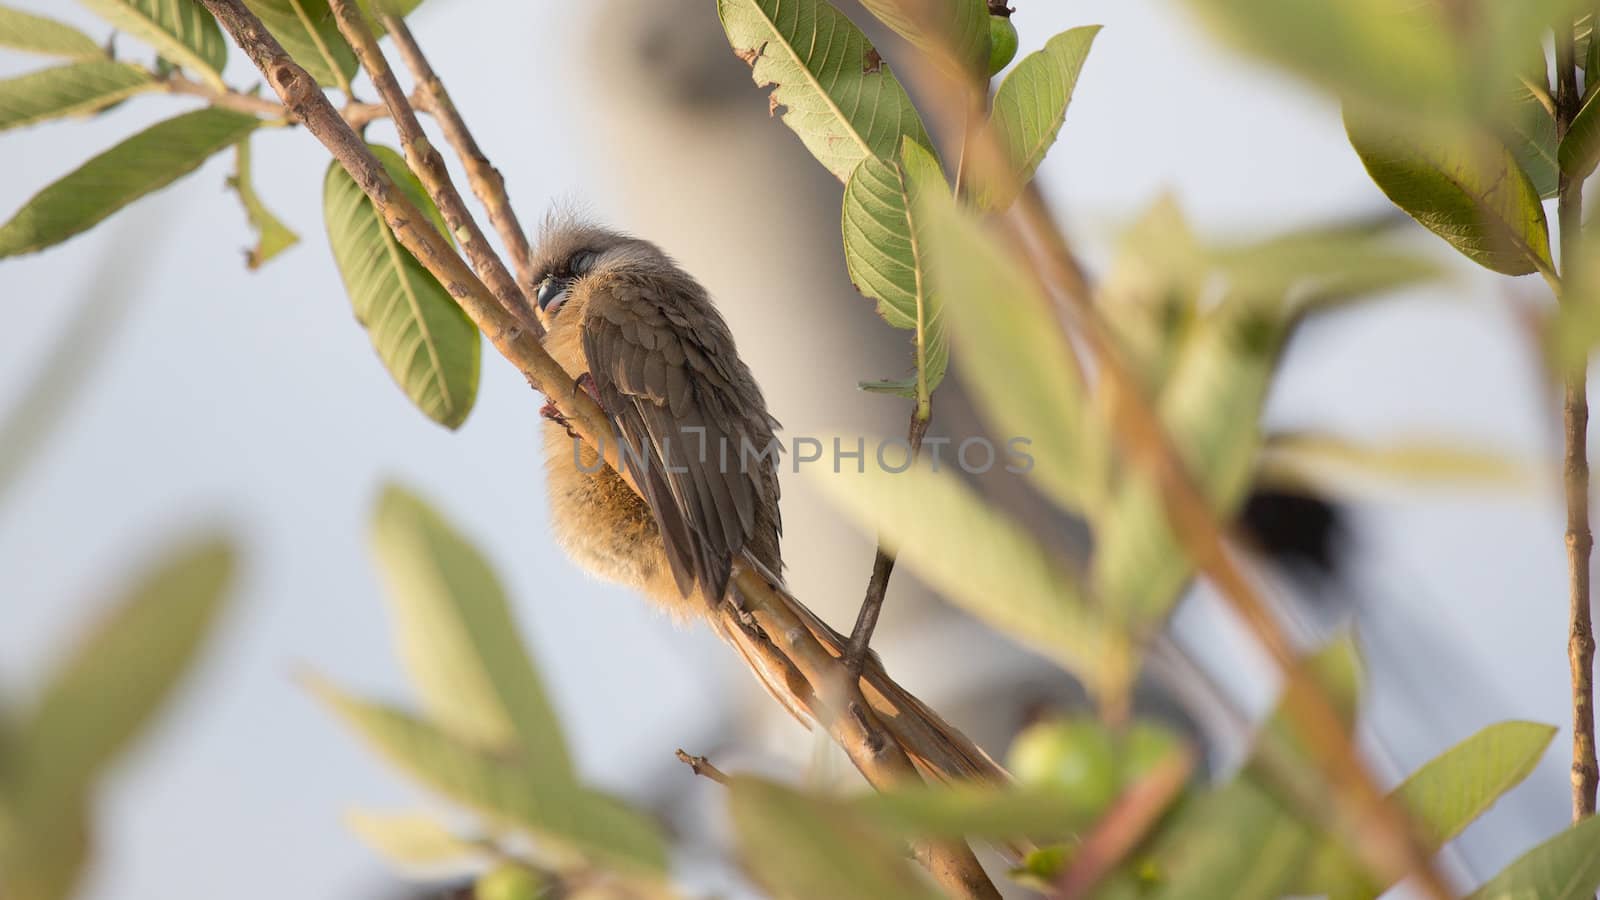 A beautiful long tailed Speckled Mousebird sitting on a thin twig